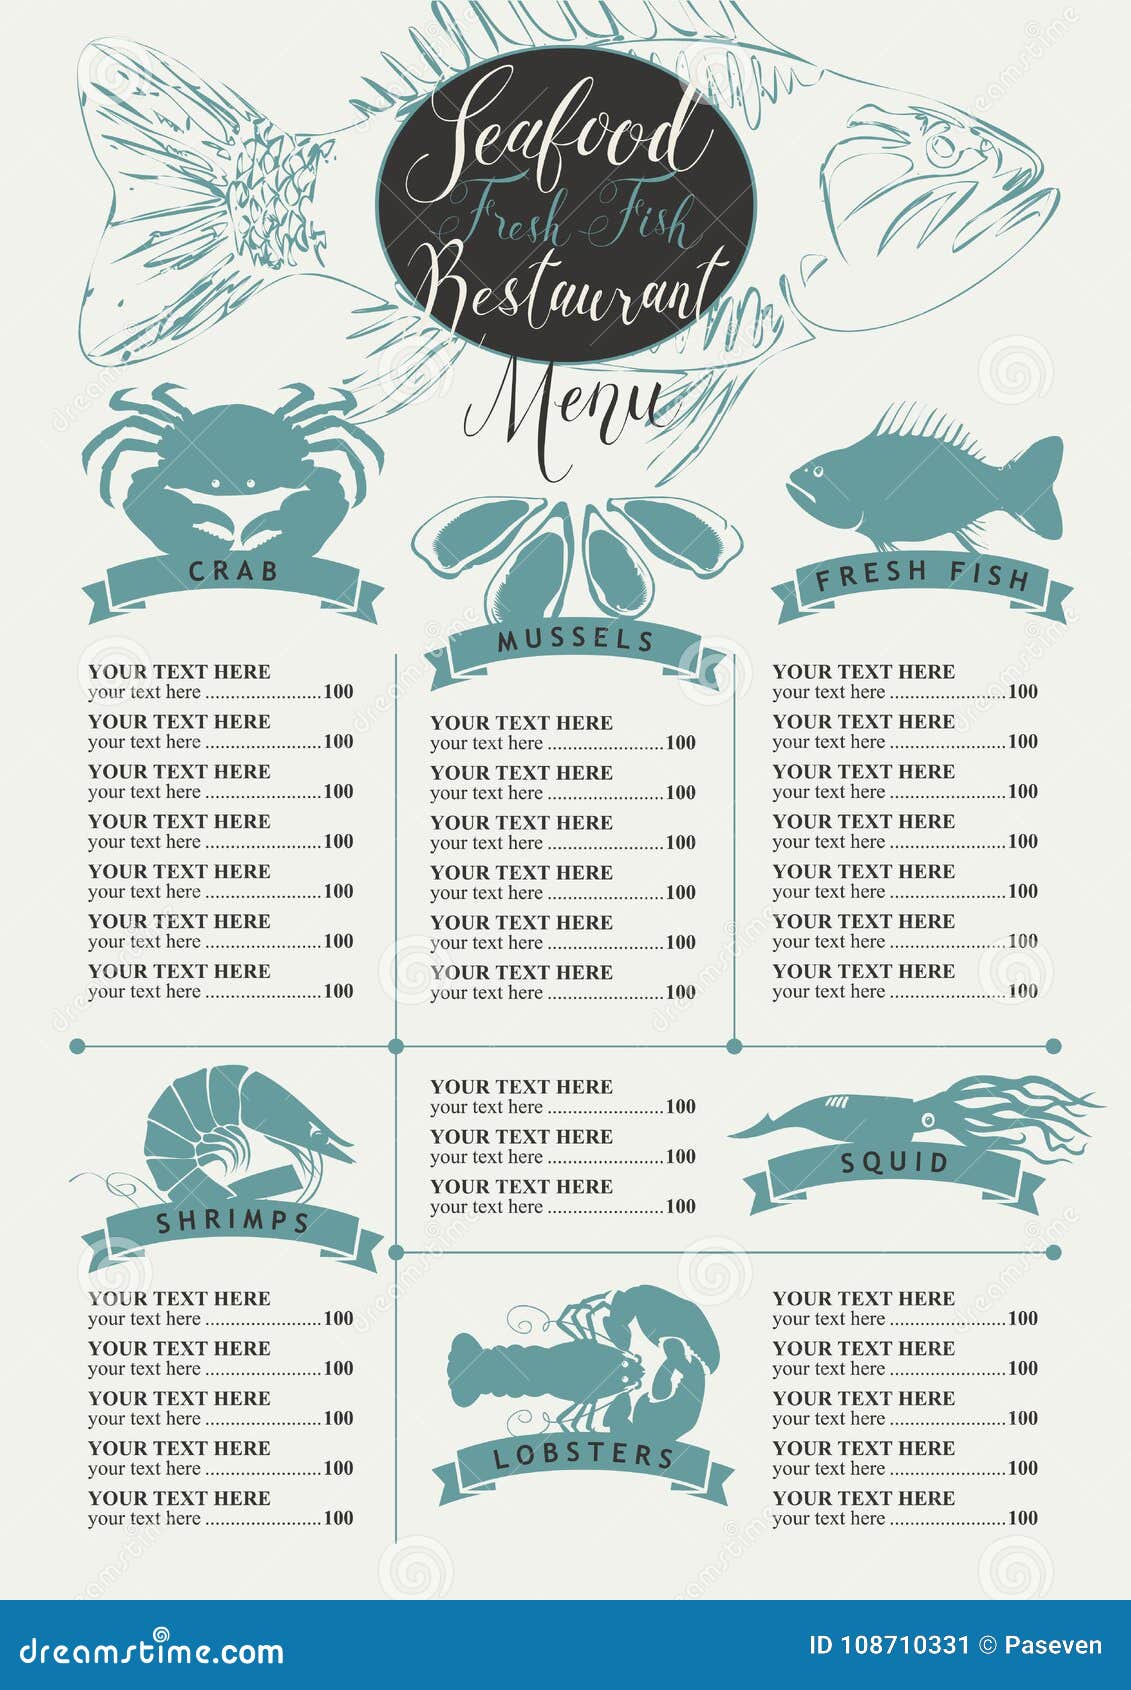 Menu with Price List for a Seafood Restaurant Stock Vector